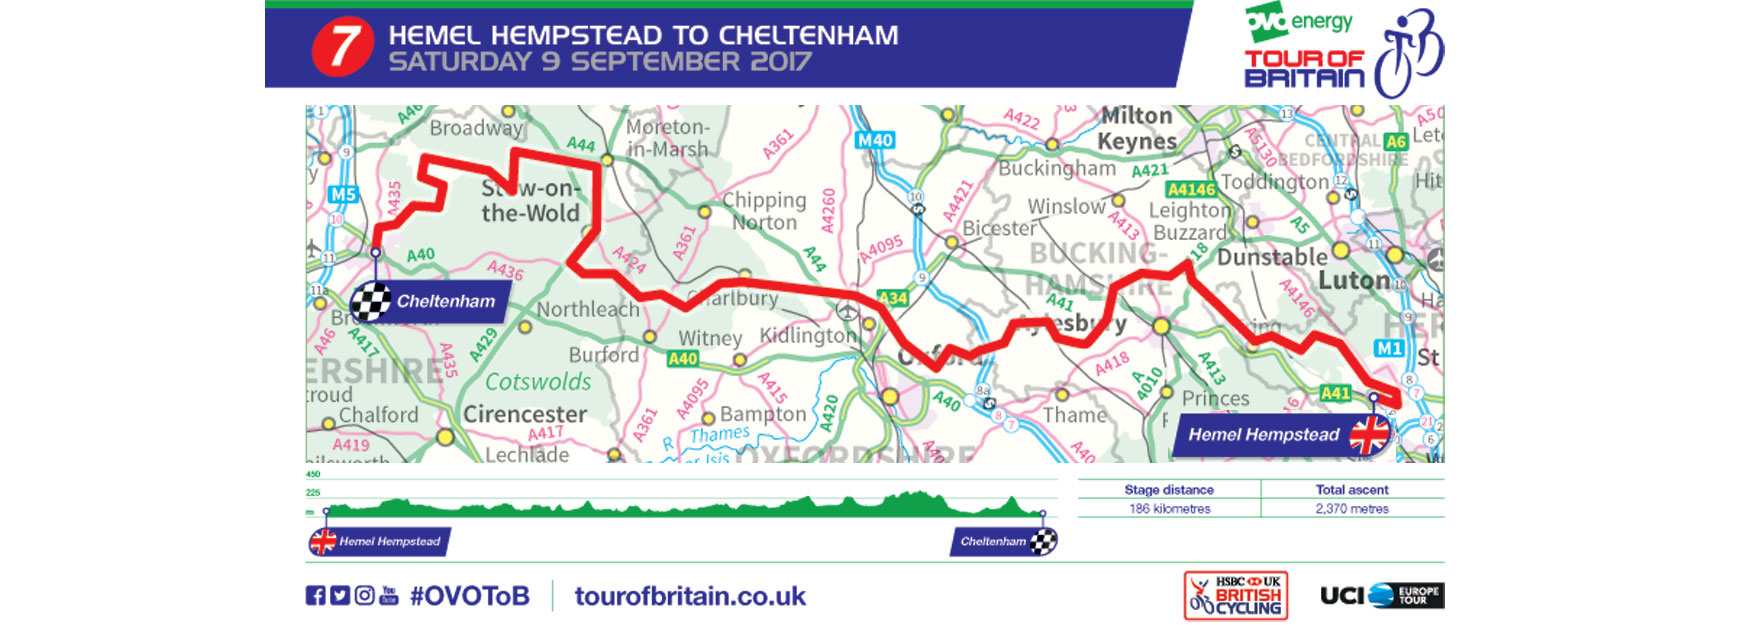 An overview of the Cotswold (7th) stage of the 2017 Tour of Britain